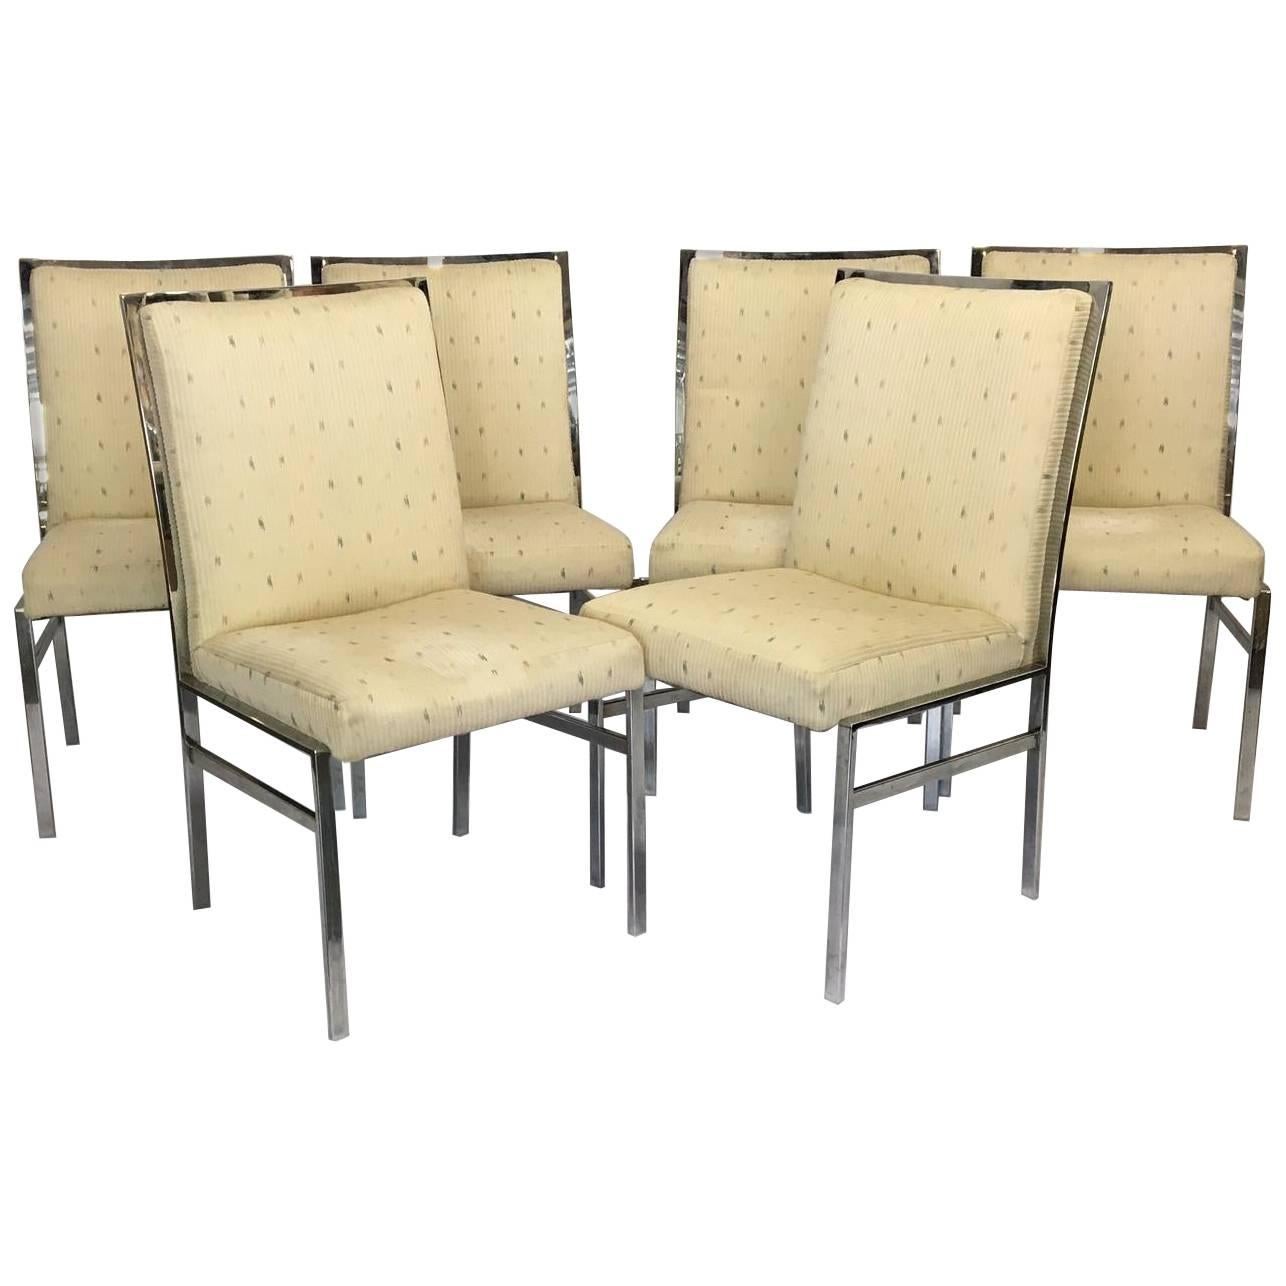 Chrome Upholstered Dining Chairs after Milo Baughman